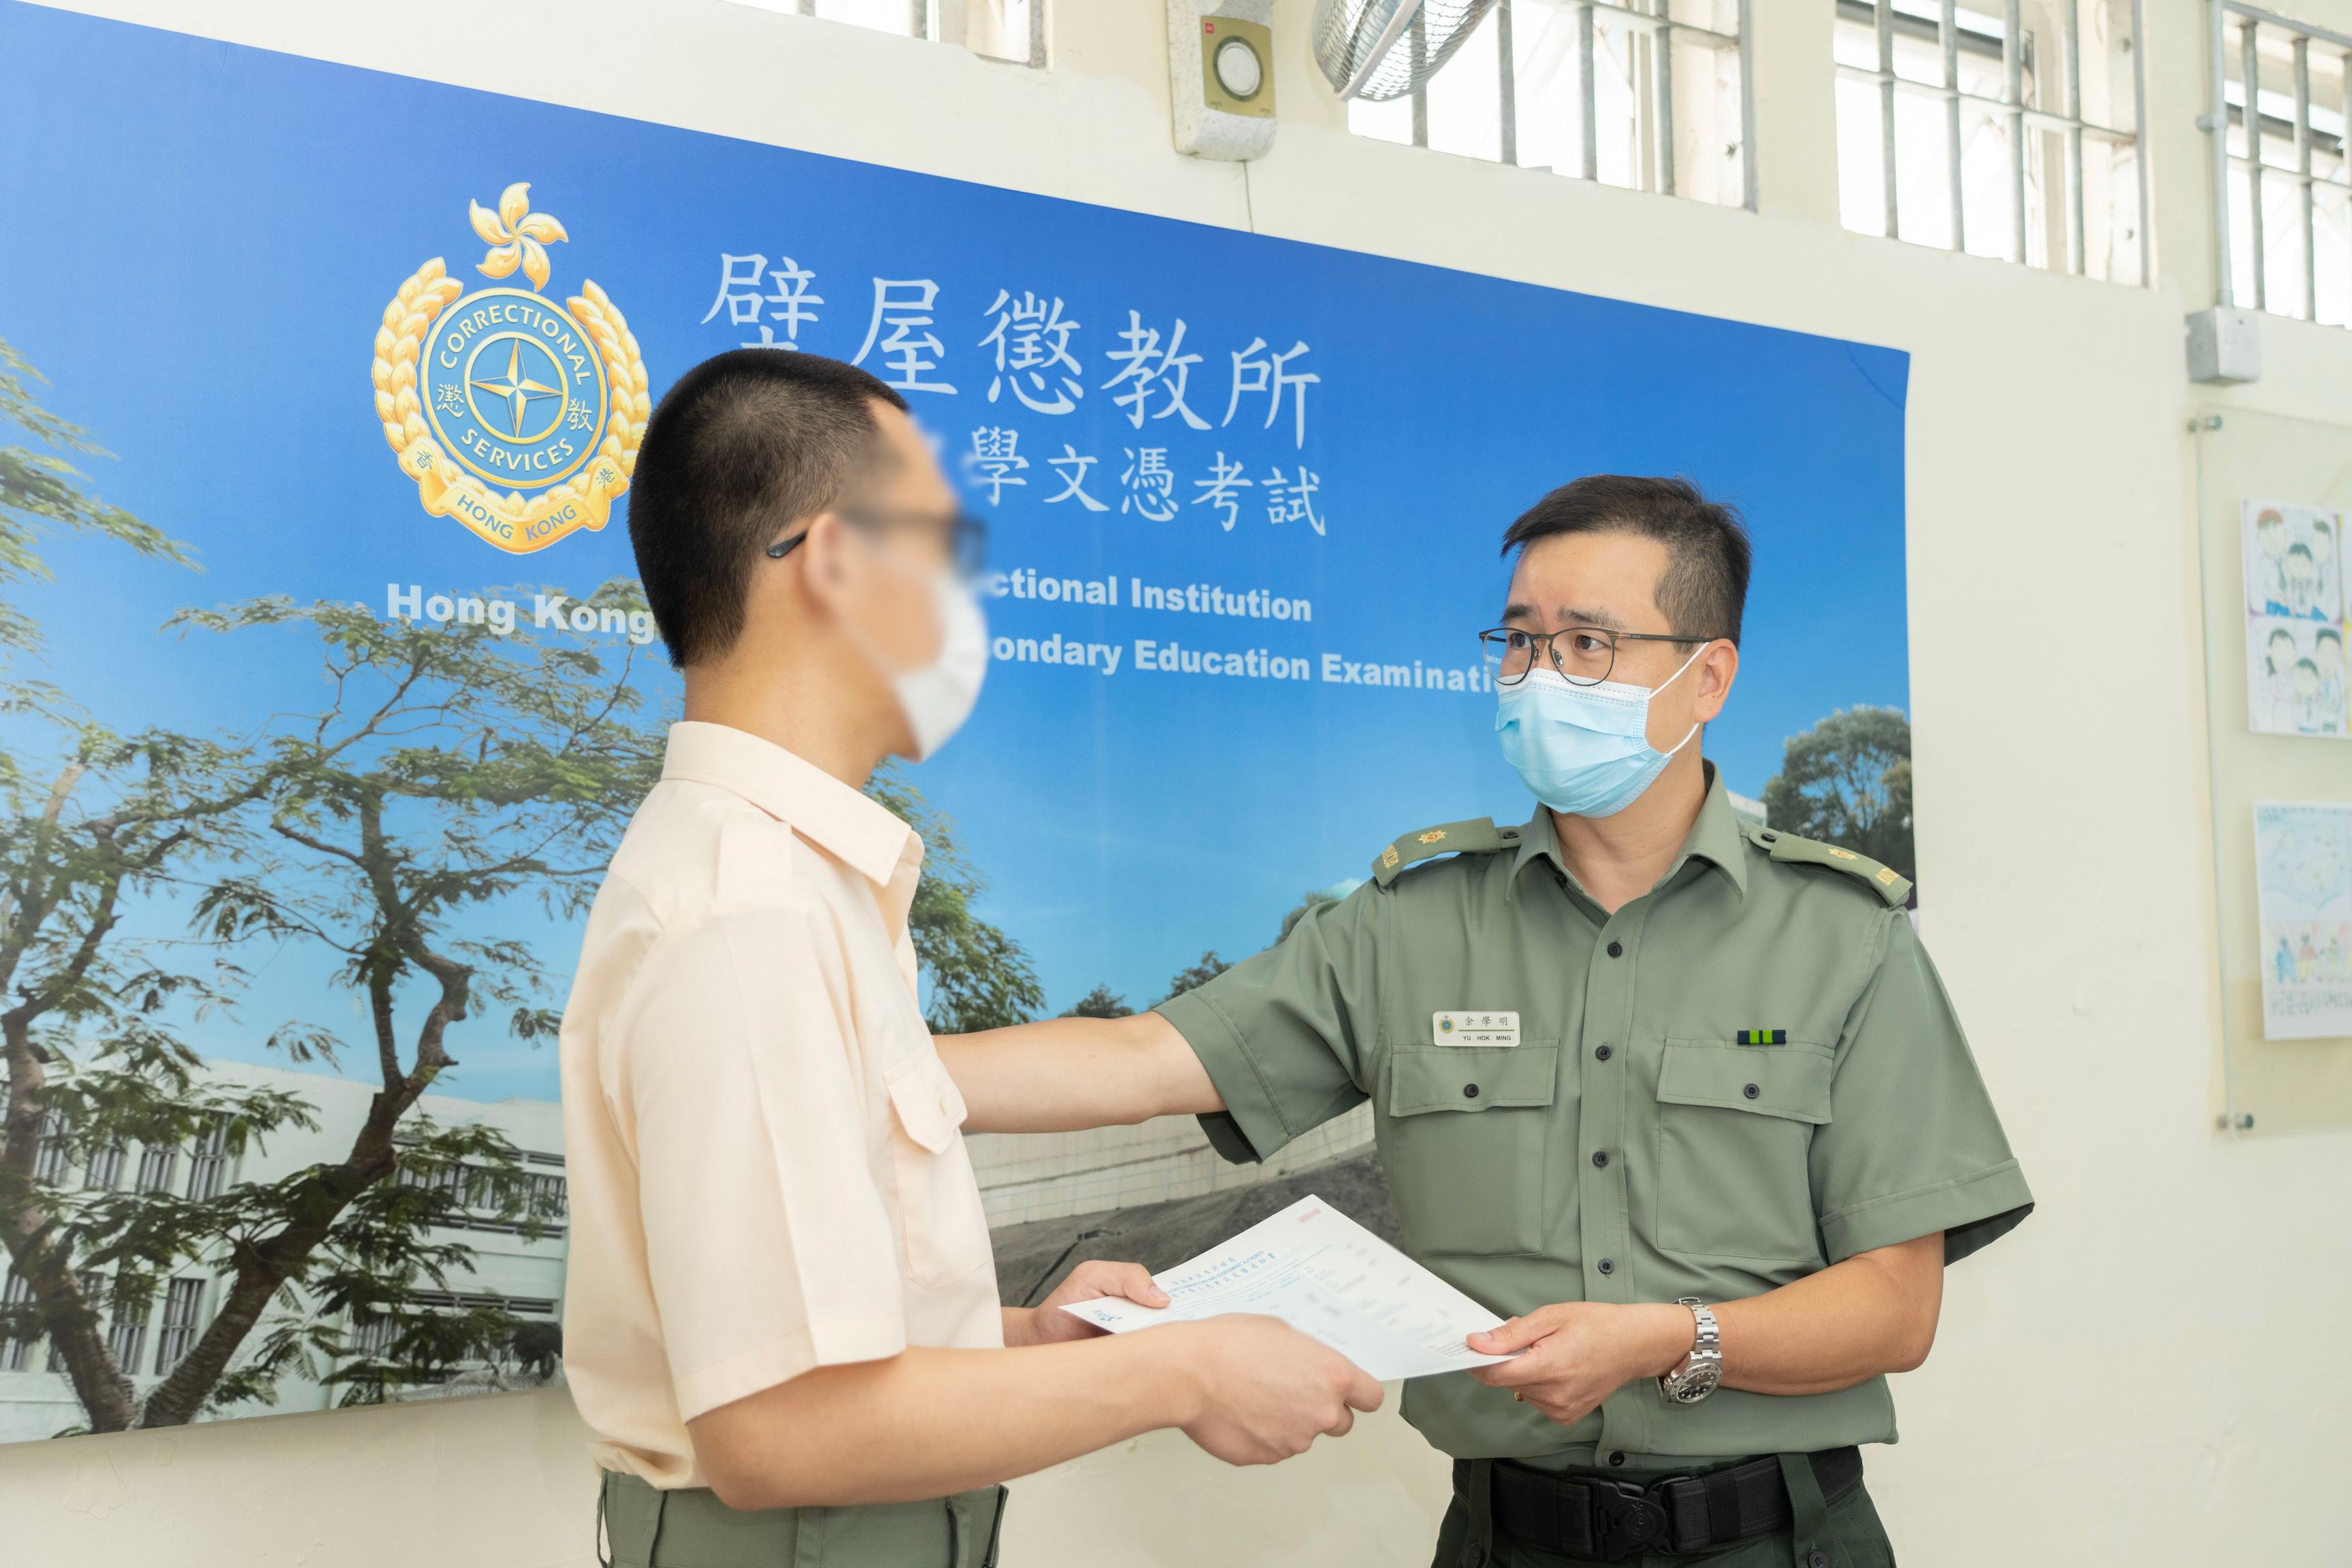 Twelve young persons in custody enrolled in the Hong Kong Diploma of Secondary Education Examination this year. Photo shows the Superintendent of Pik Uk Correctional Institution, Mr Yu Hok-ming (right), presenting an examination certificate to a young person in custody, Siu-kit (false name).